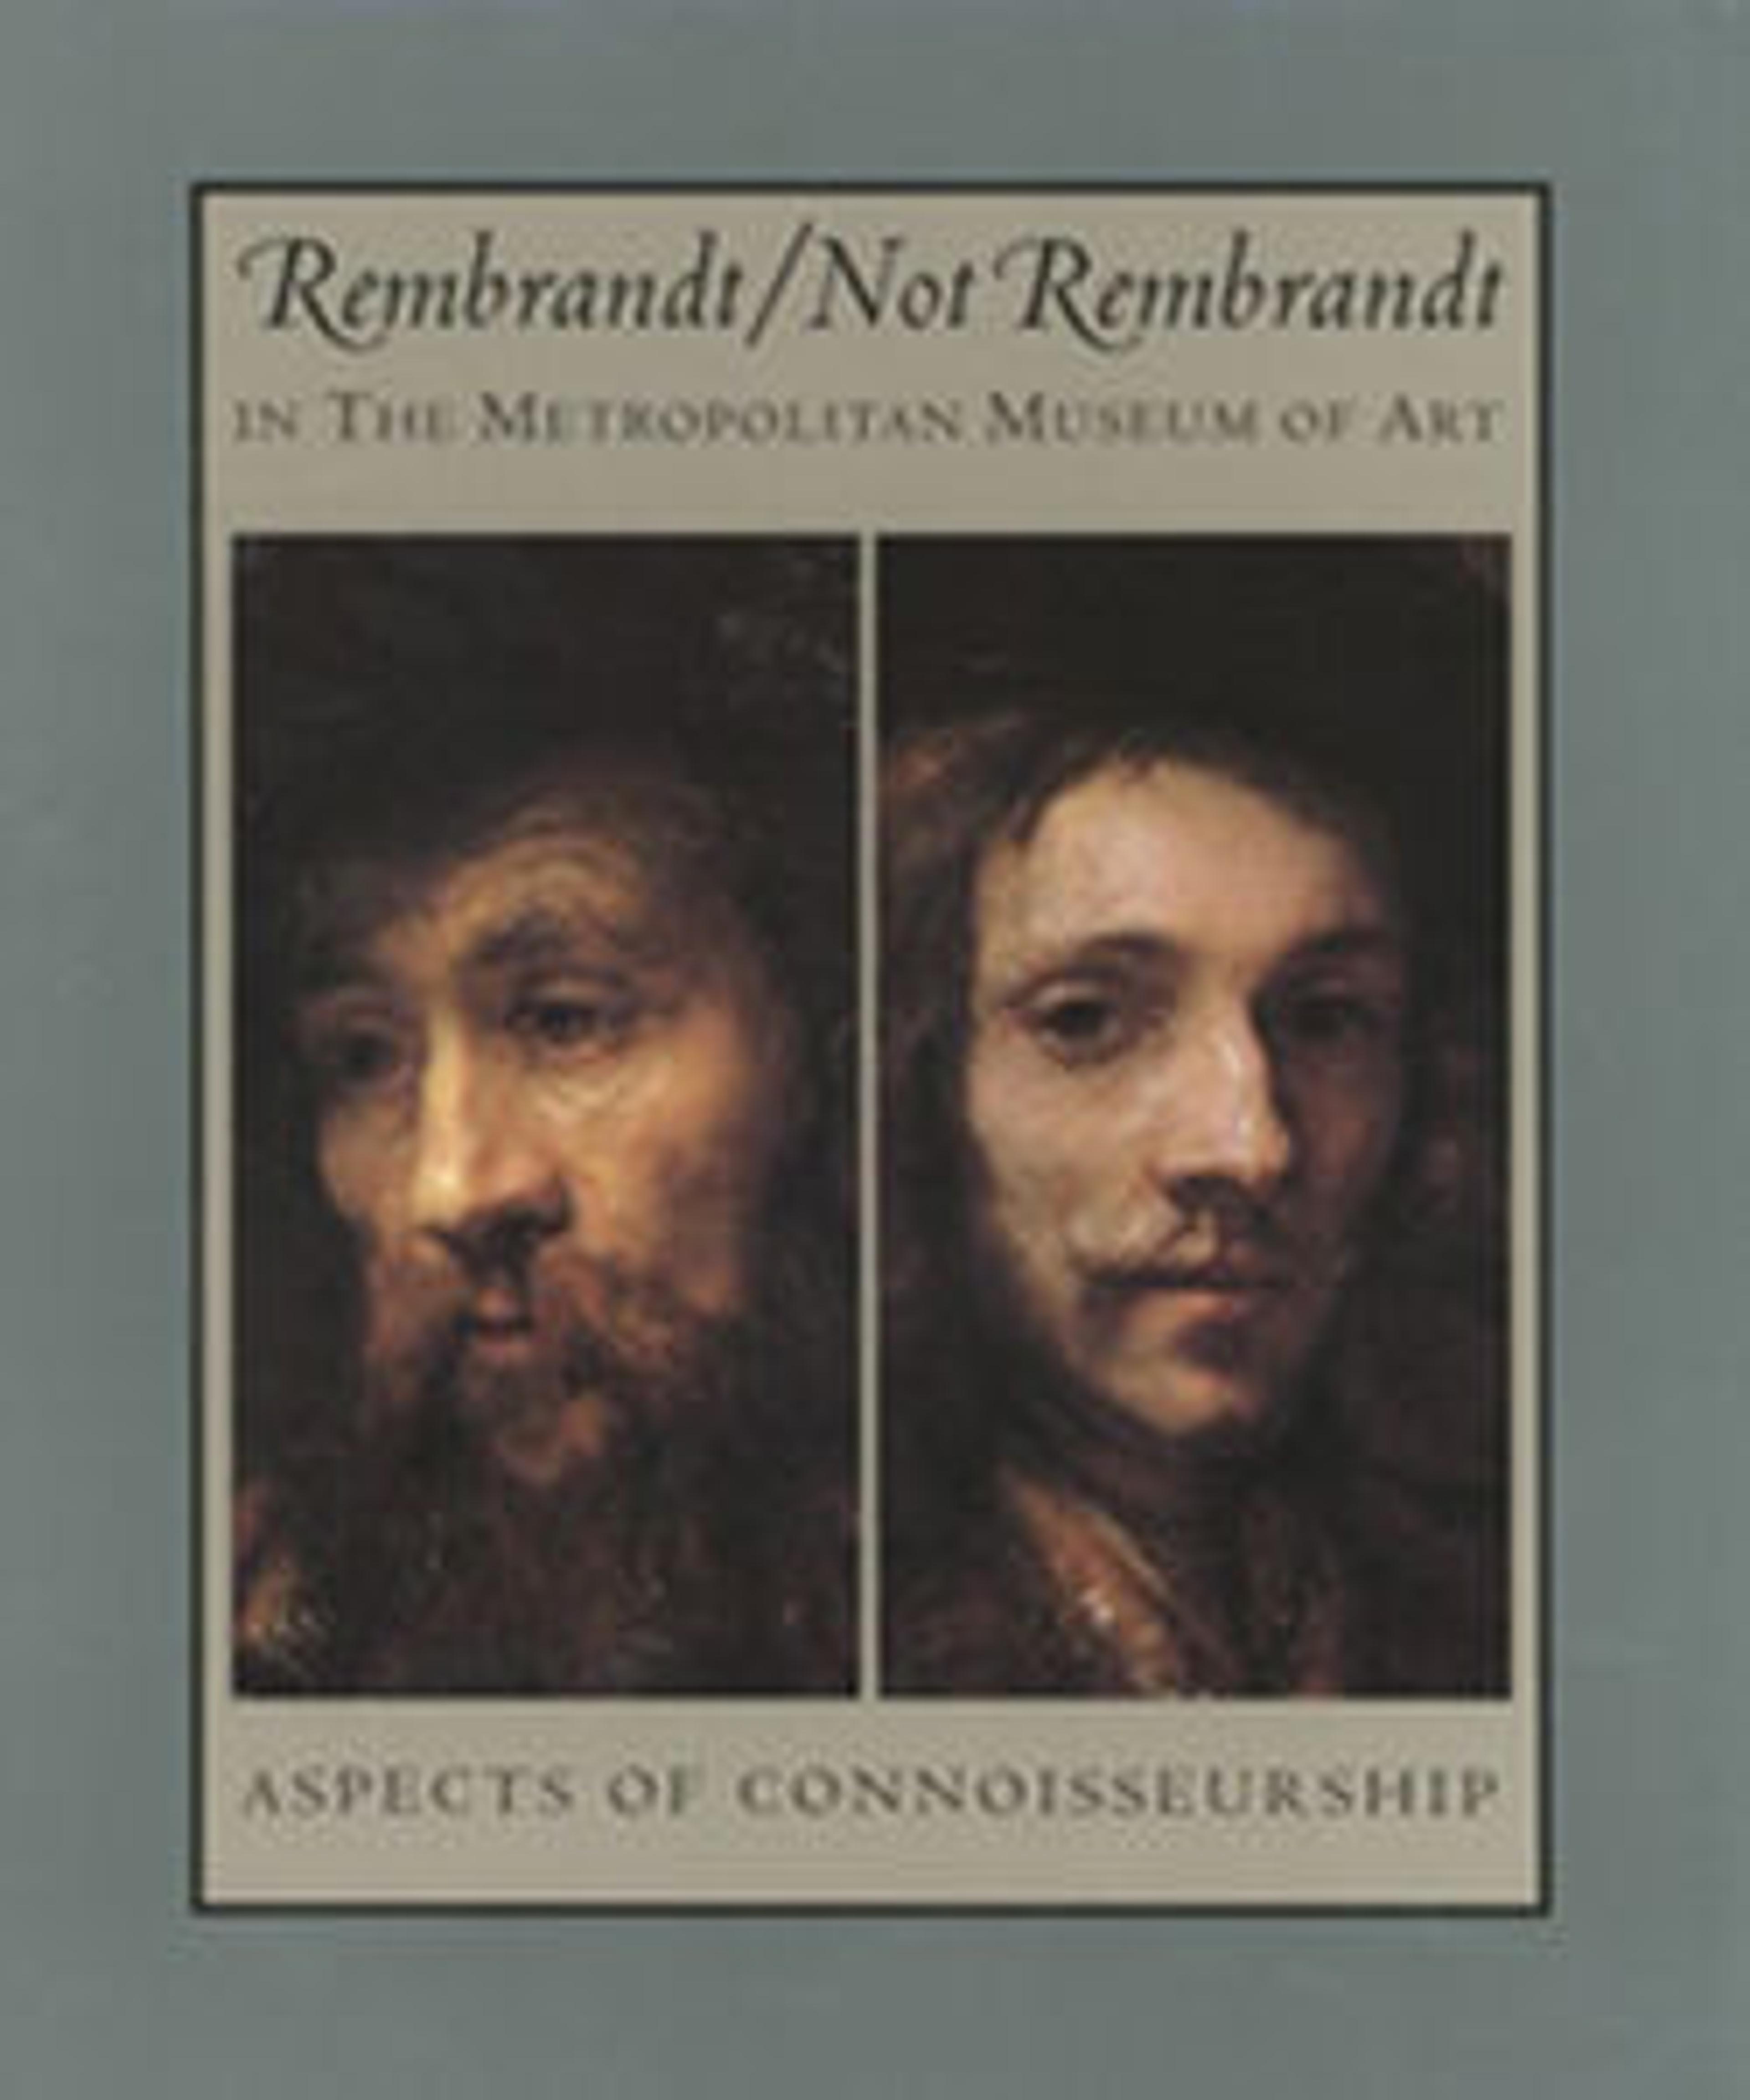 Rembrandt/Not Rembrandt in The Metropolitan Museum of Art: Aspects of Connoisseurship, Volumes I and II